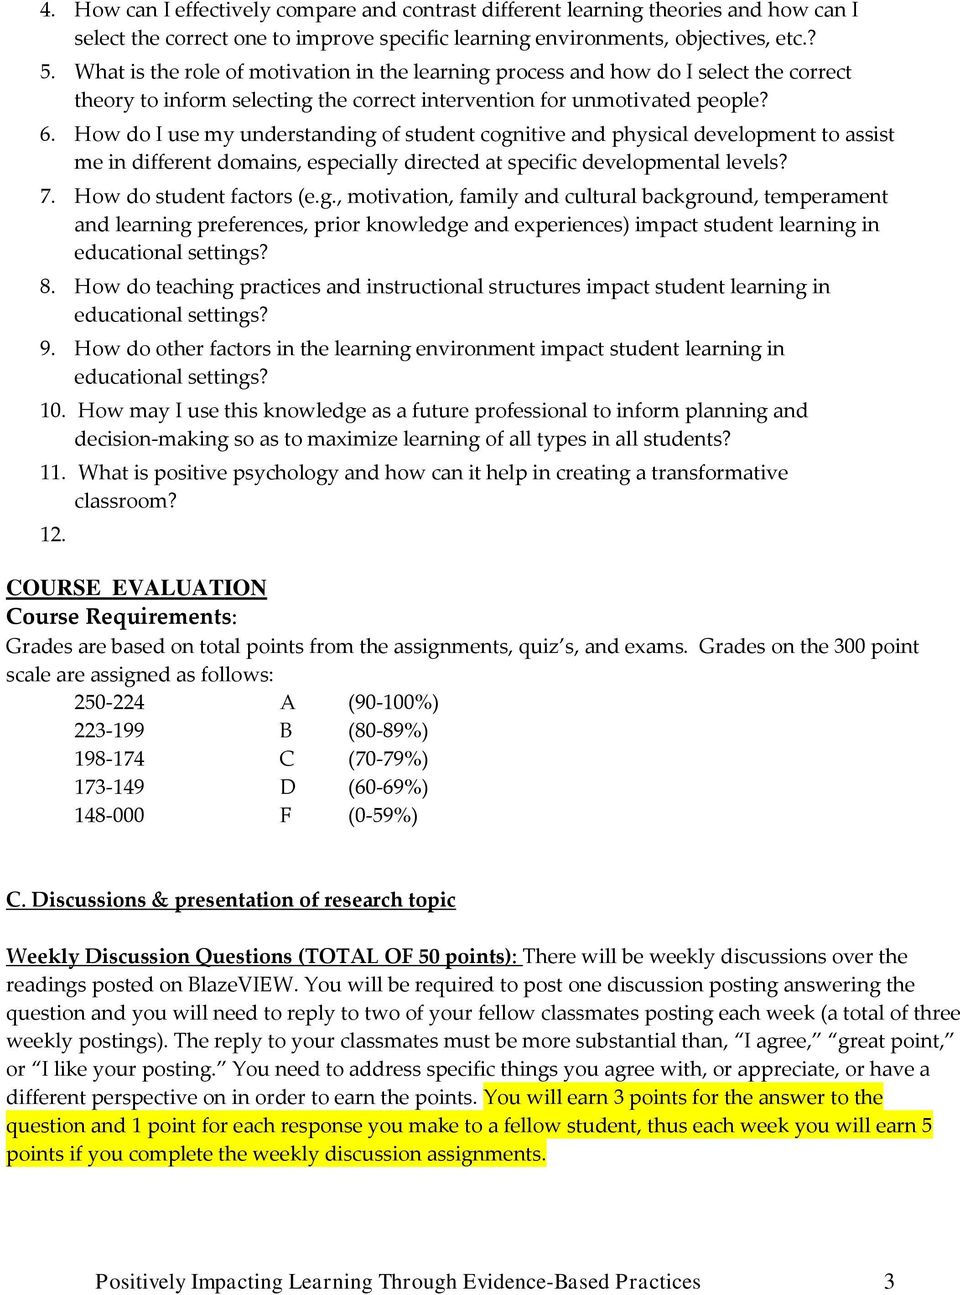 How do I use my understanding of student cognitive and physical development to assist me in different domains, especially directed at specific developmental levels? 7. How do student factors (e.g., motivation, family and cultural background, temperament and learning preferences, prior knowledge and experiences) impact student learning in educational settings?